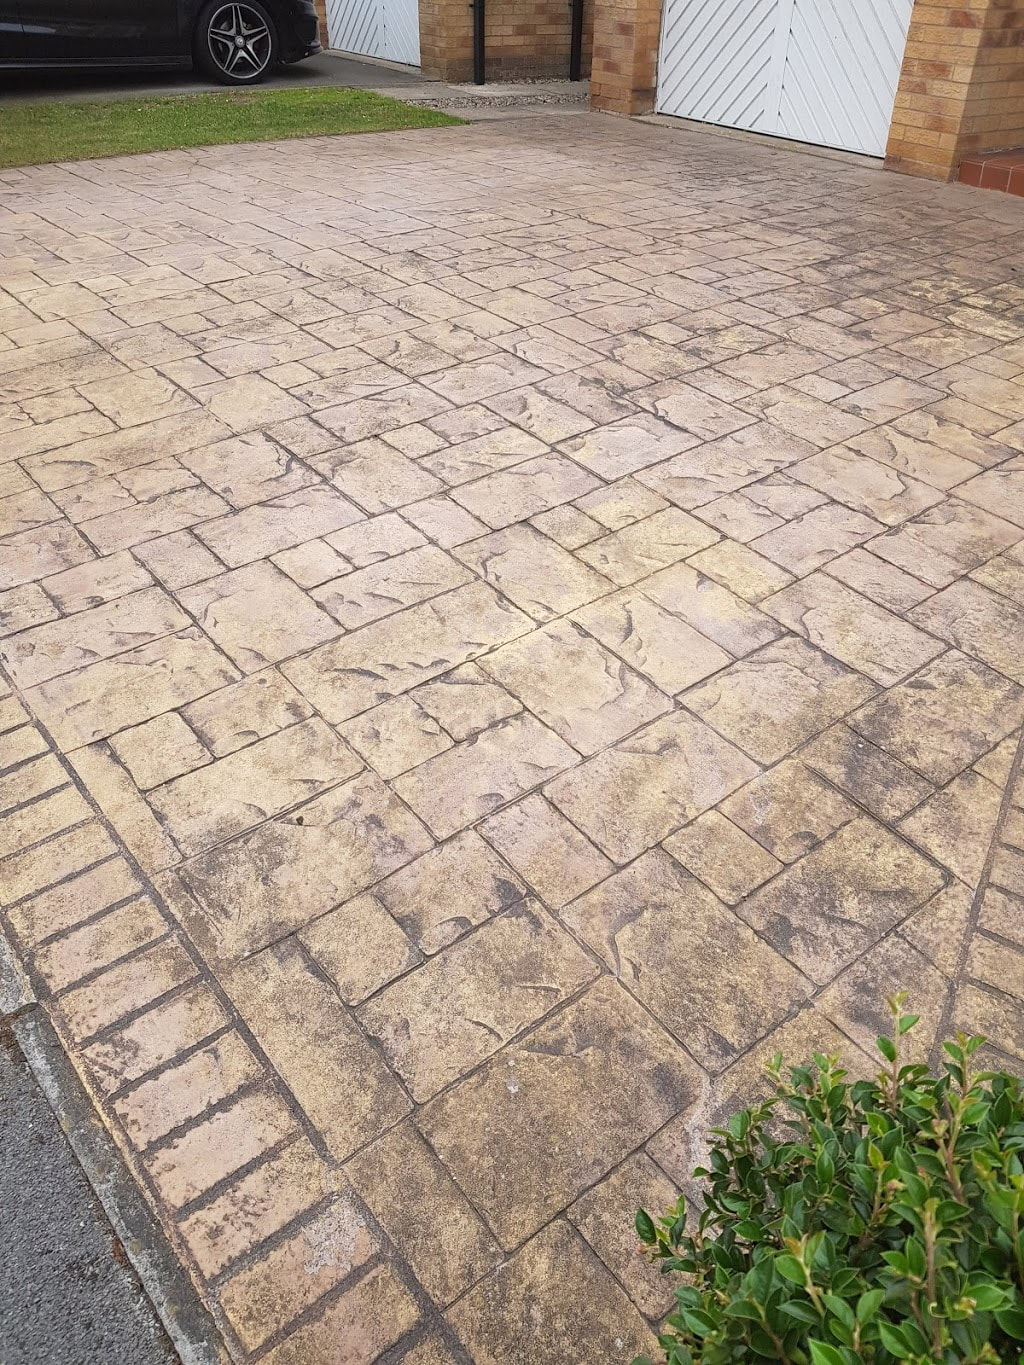 imprinted concrete before being cleaned